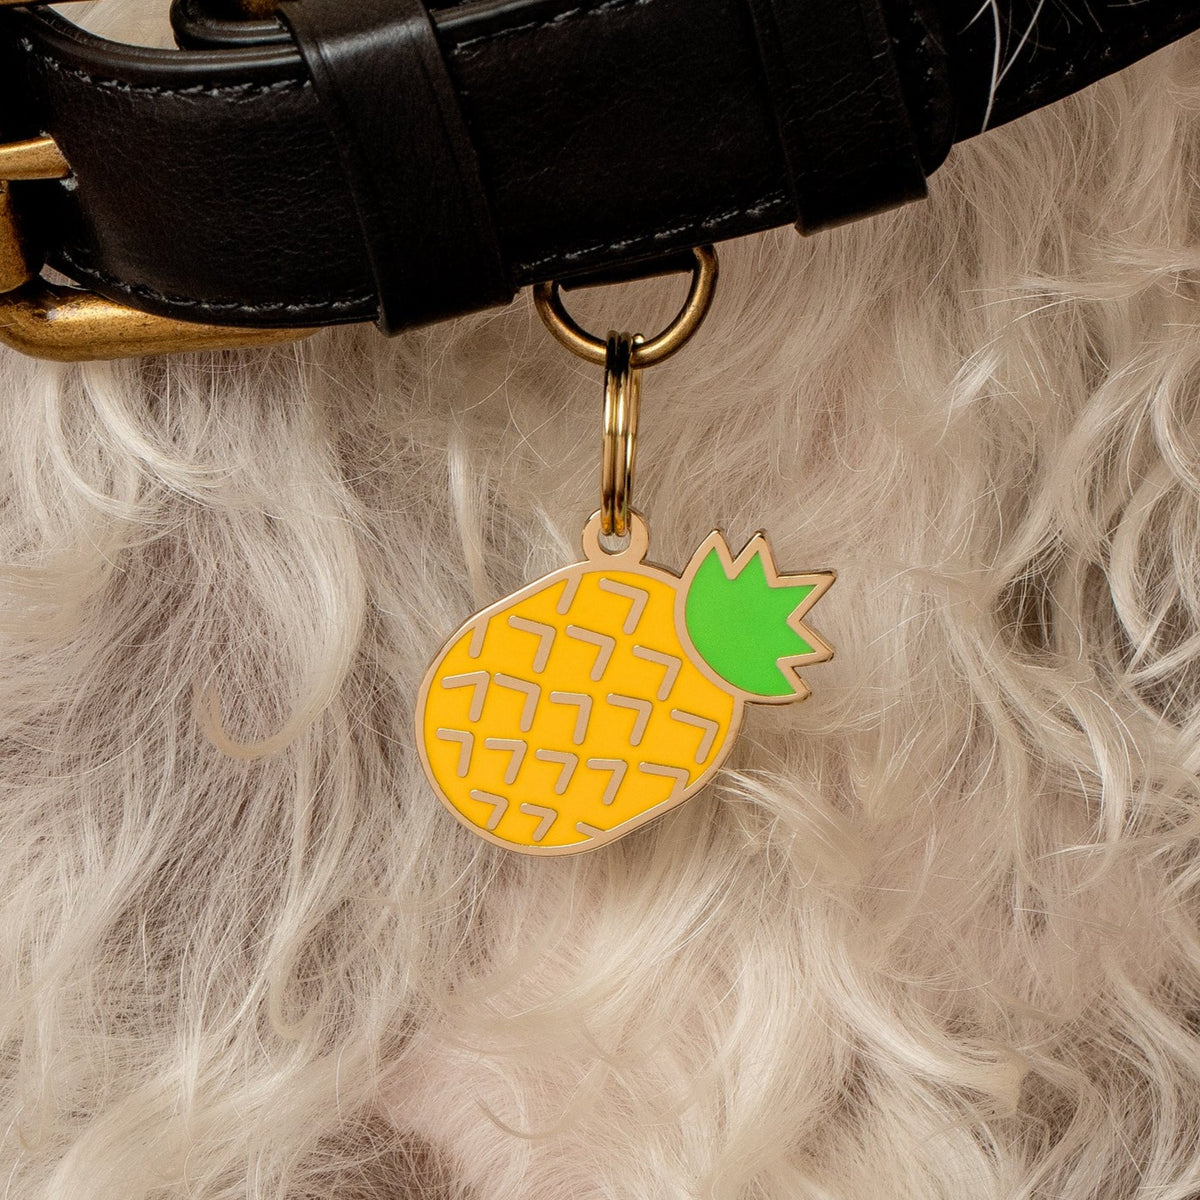 Pineapple Pet ID Tag - 3 Red Rovers